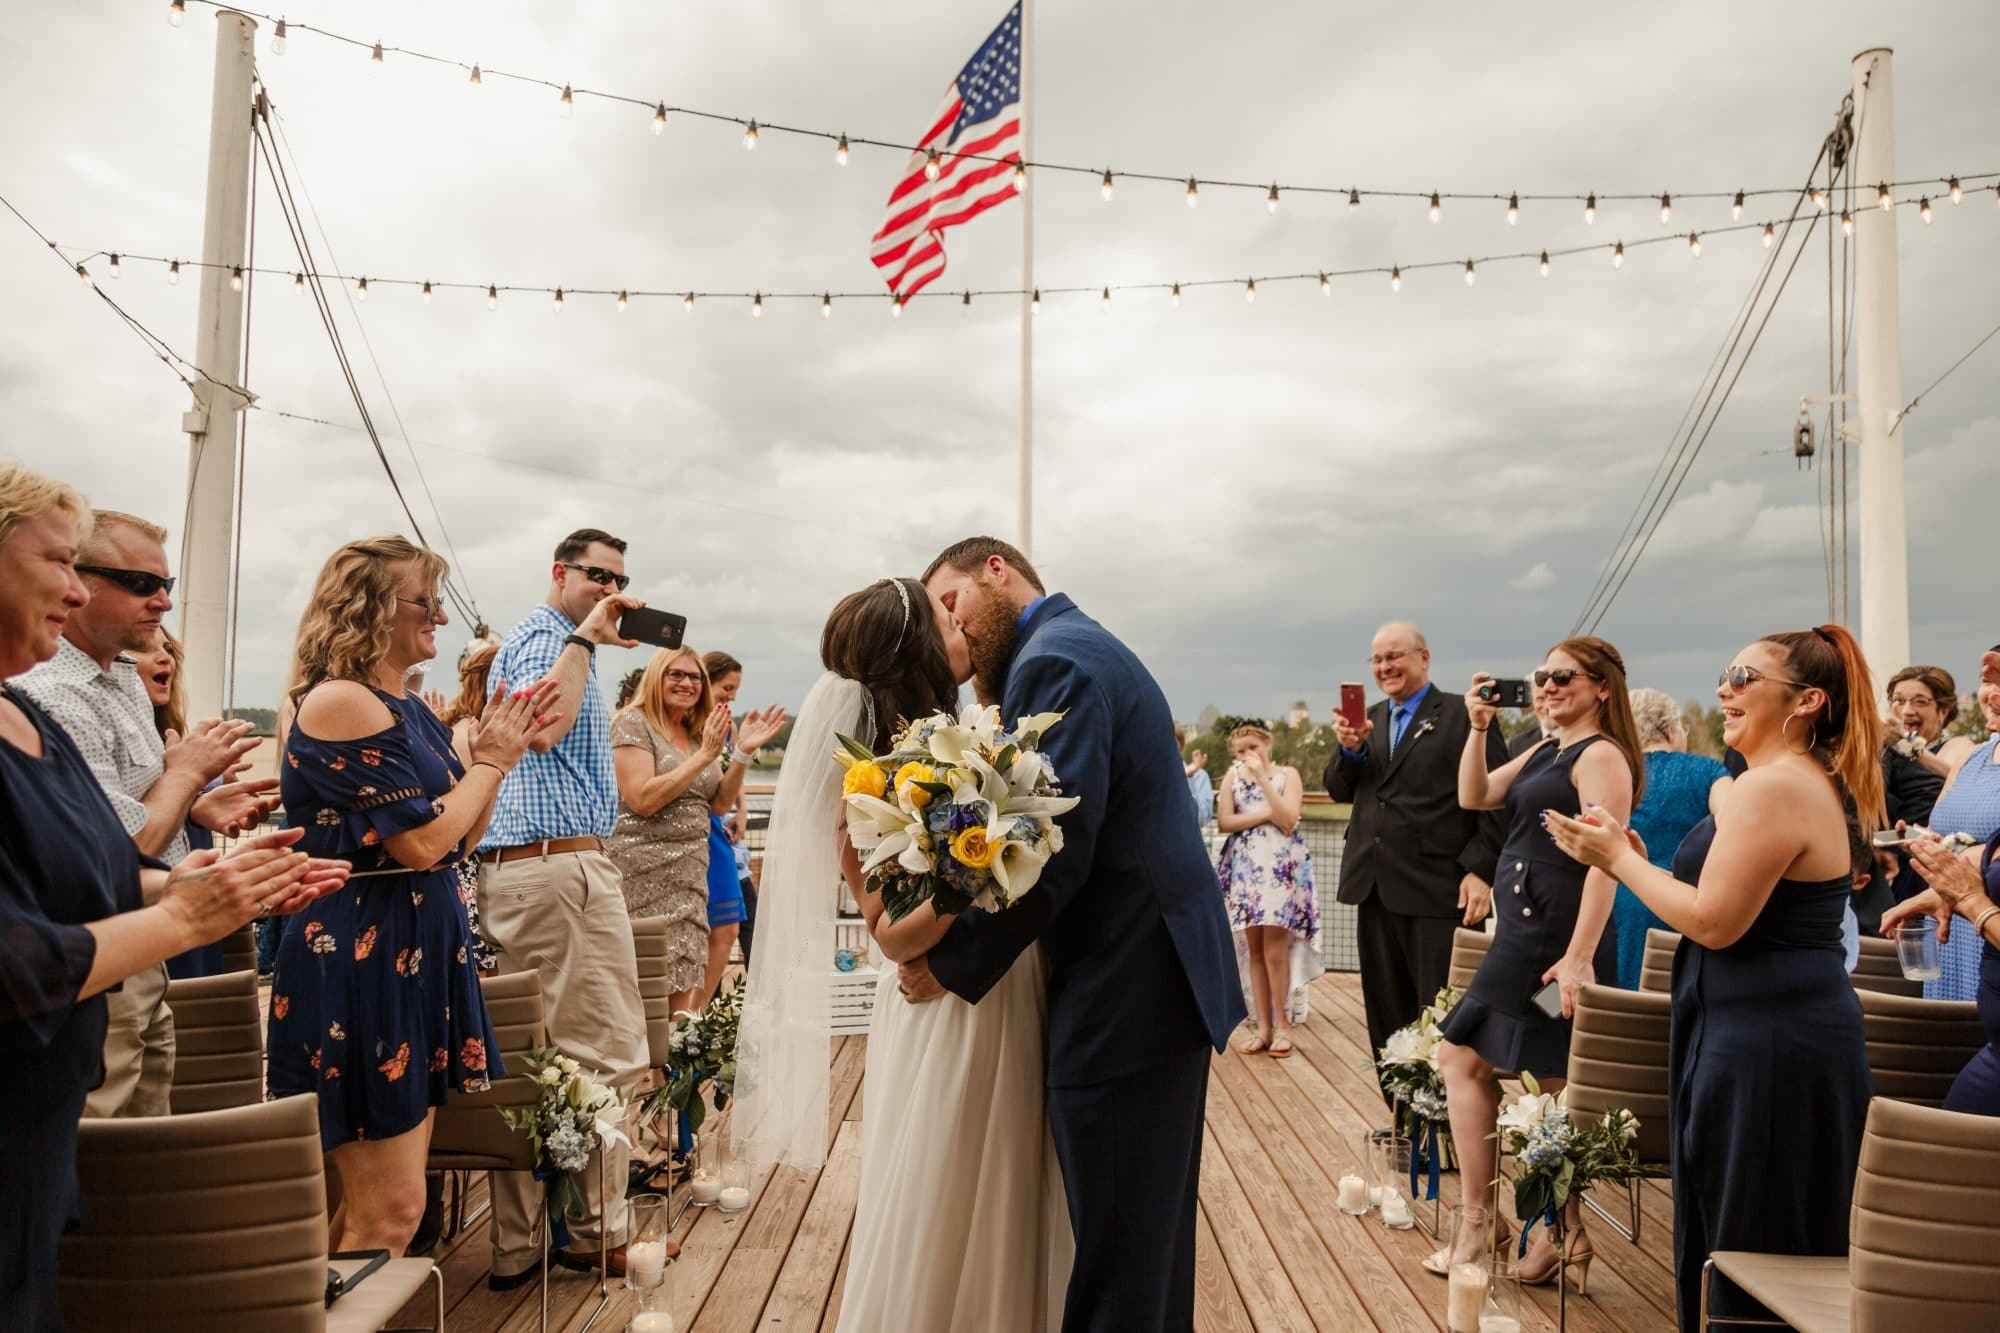 For the Love of Events - Newlyweds kissing on dock in front of wedding guests